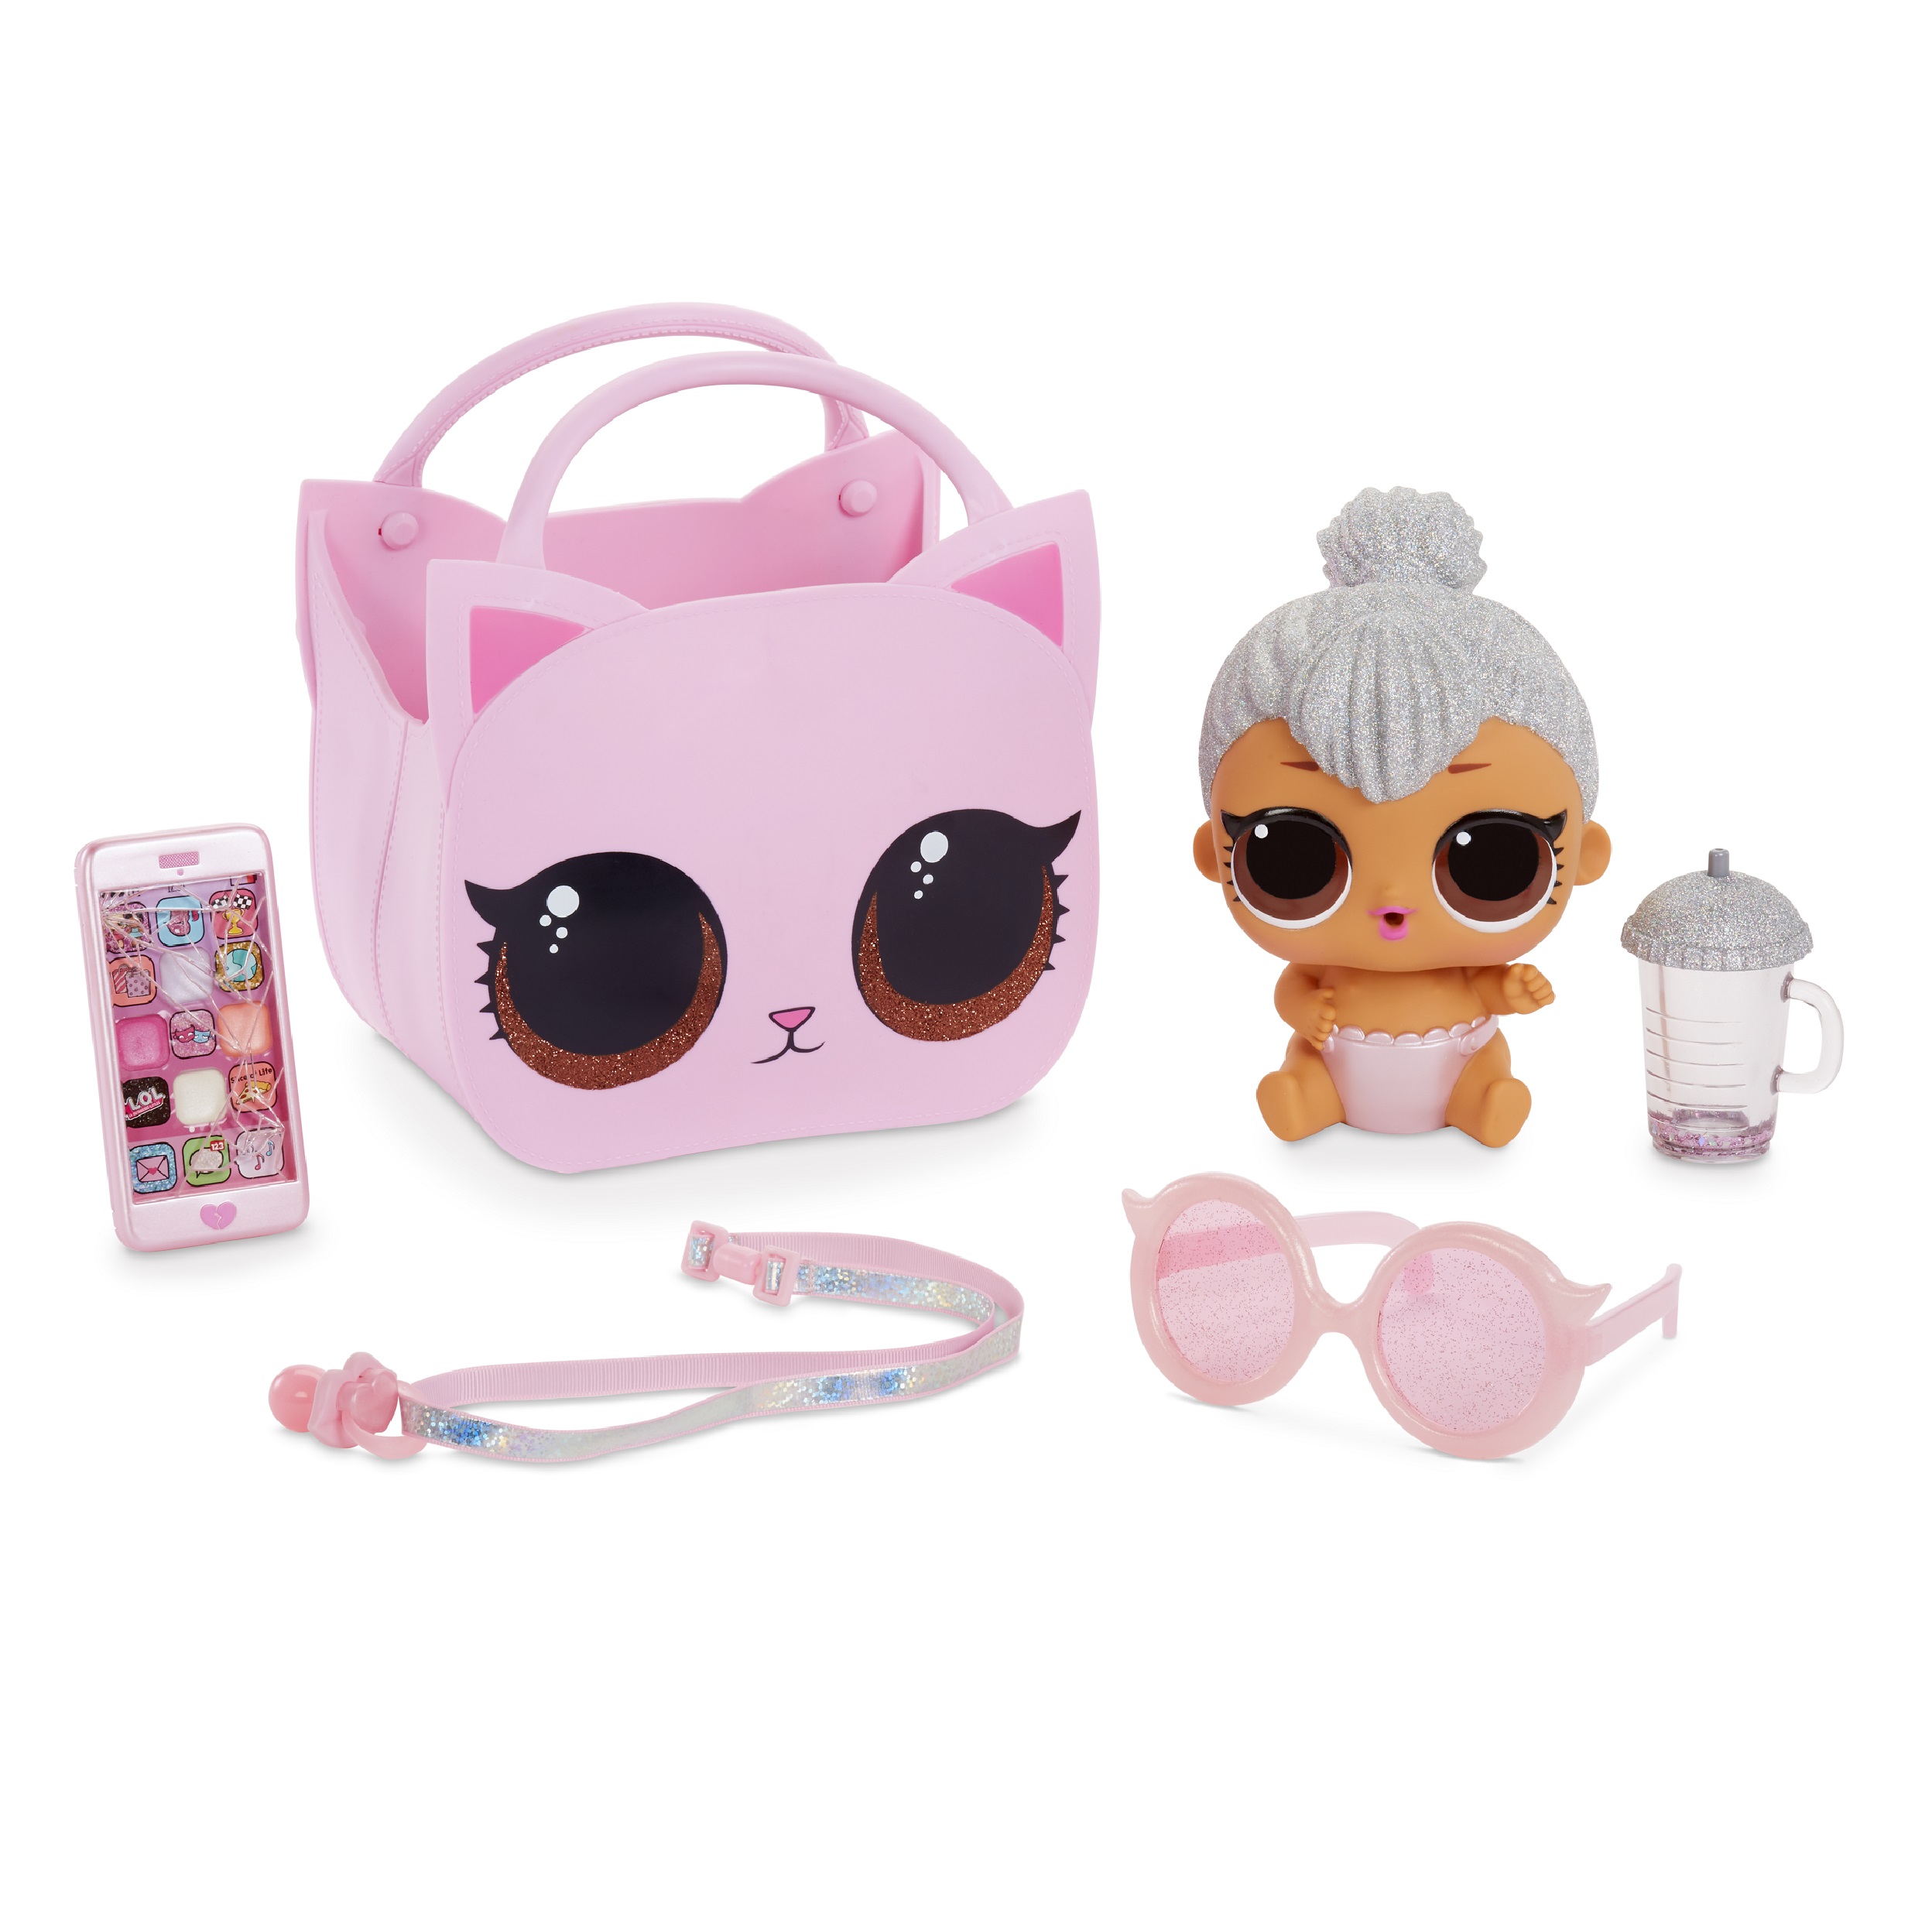 LOL Surprise Ooh La La Baby Surprise Lil Kitty Queen With Purse, Great Gift for Kids Ages 4 5 6+ - image 1 of 3